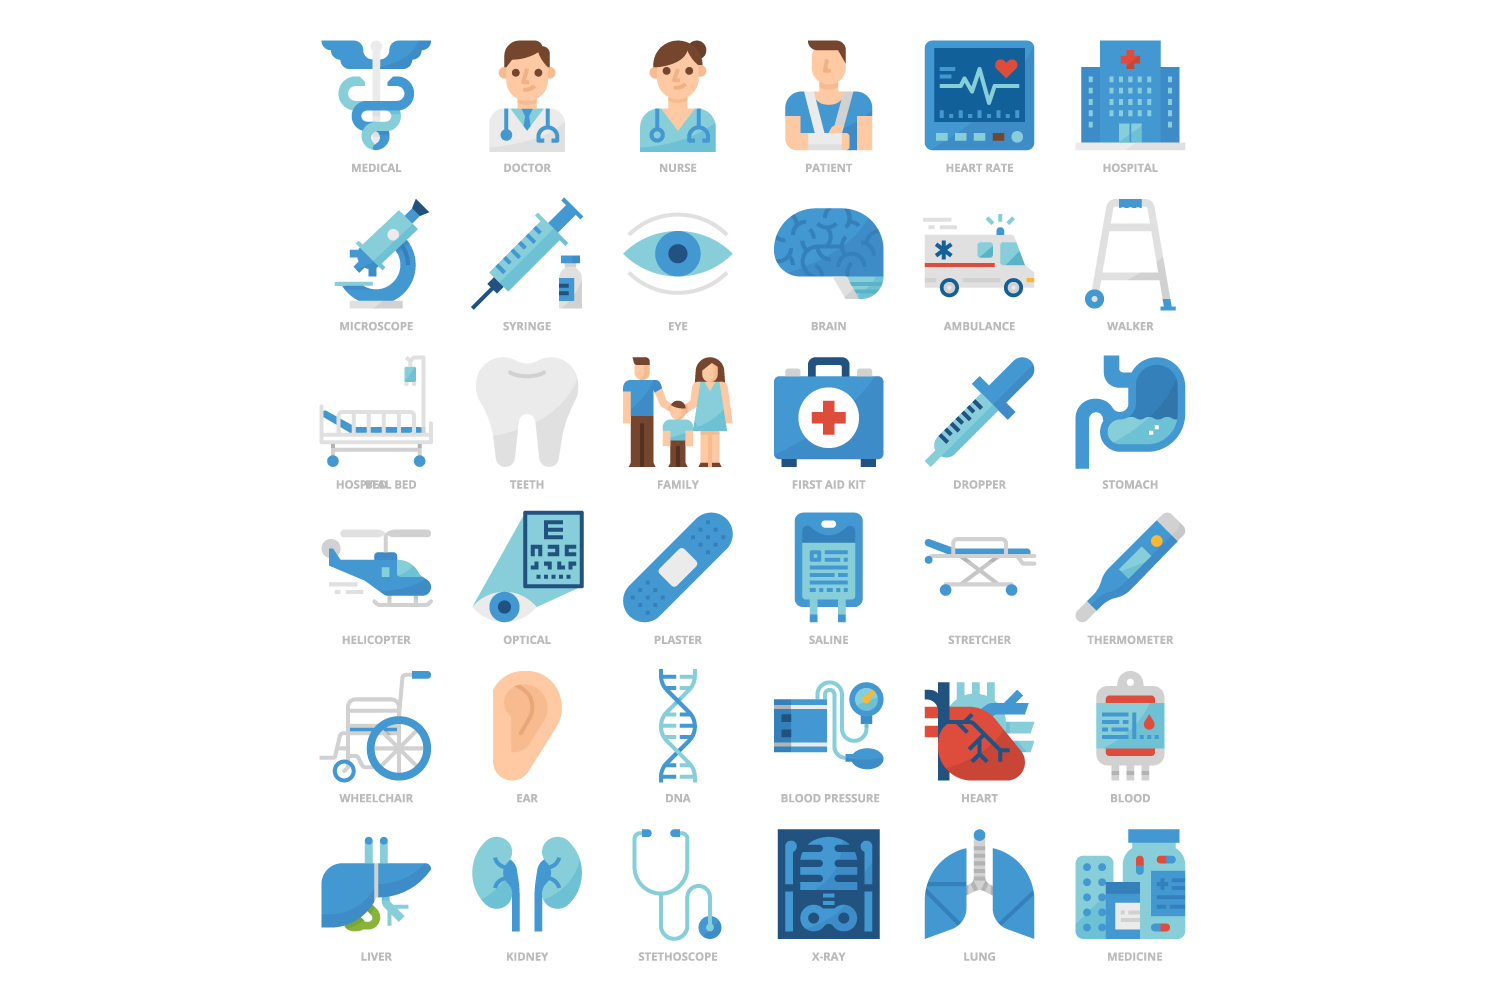 Blue and white poster with medical icons.